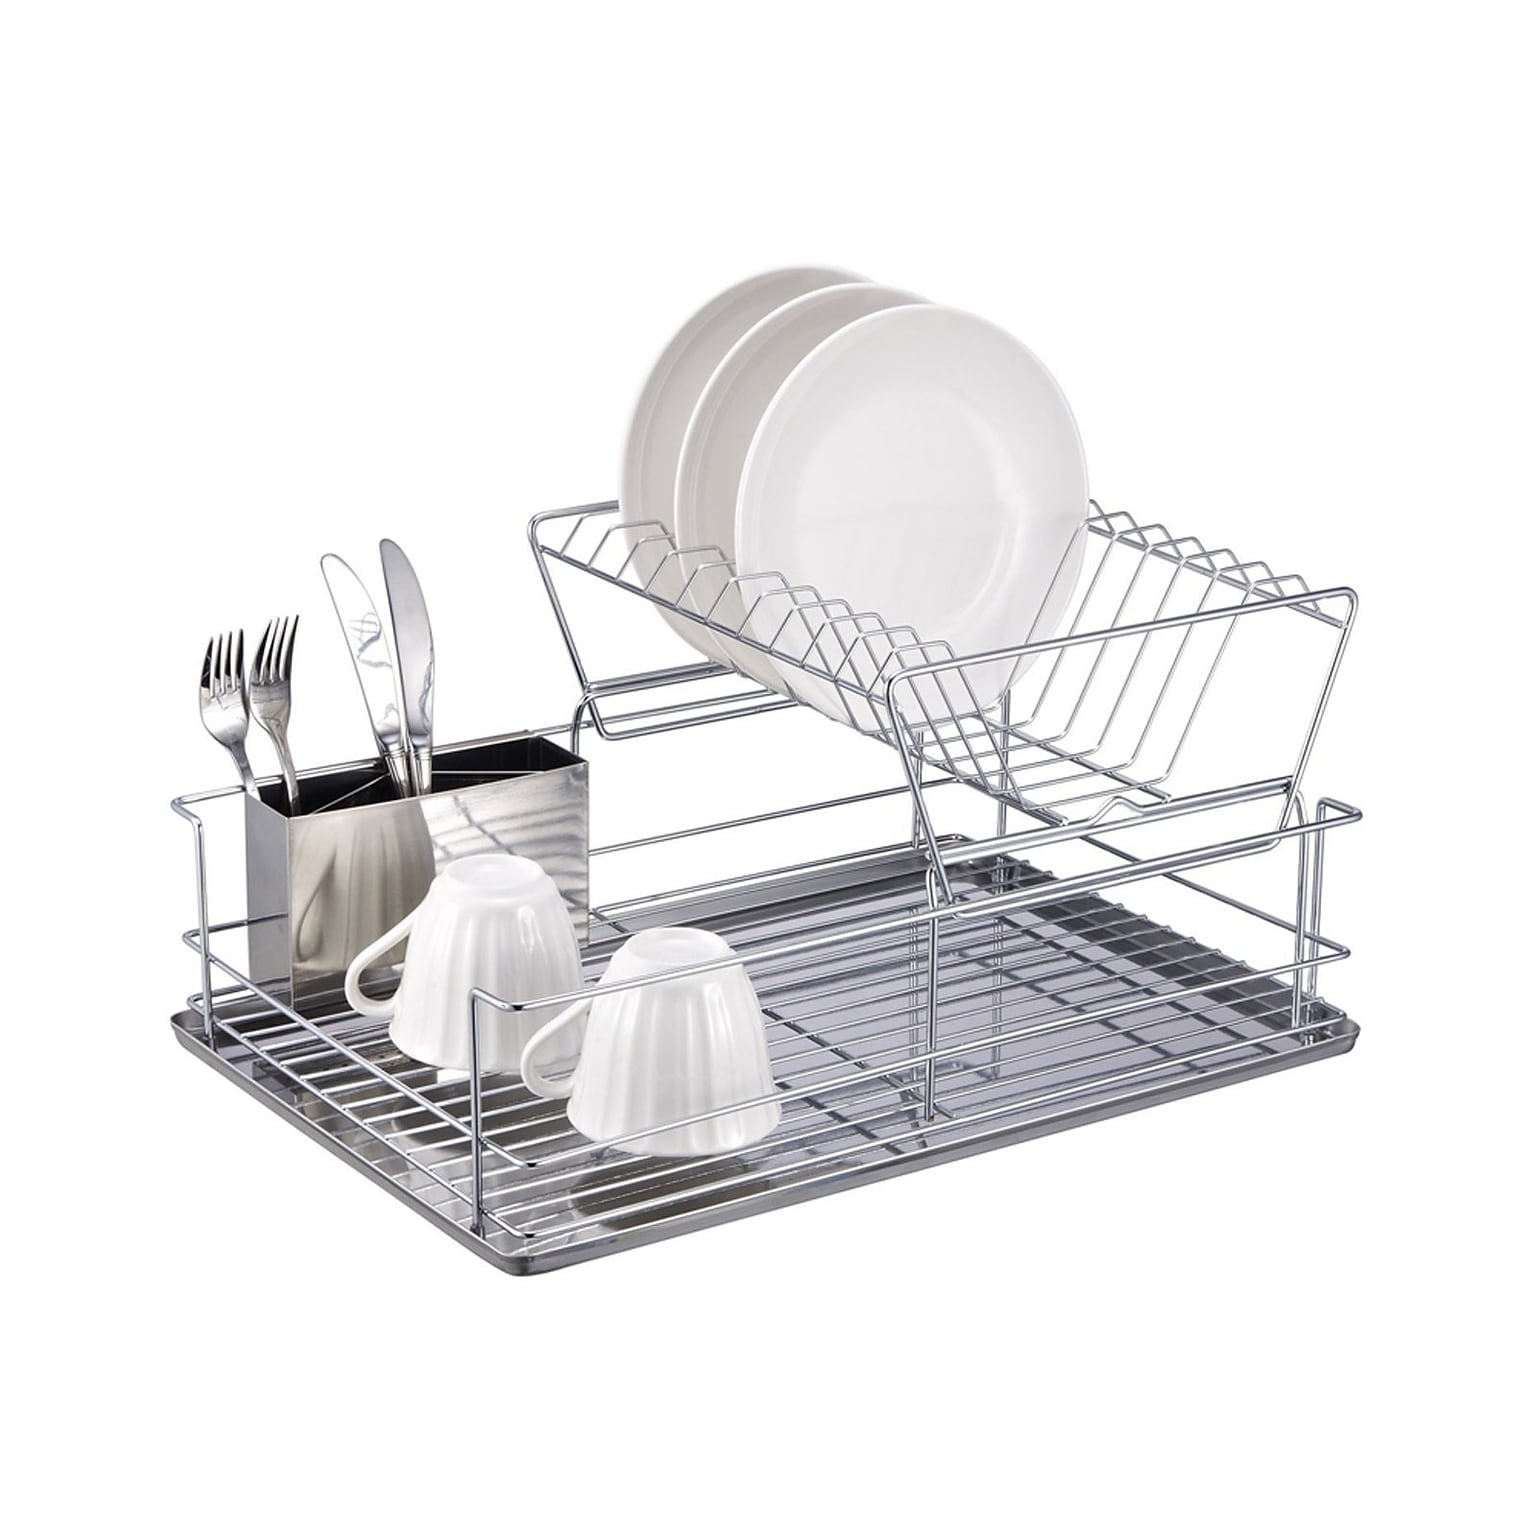 Better Chef® 22 Chrome Plated Metal Dish Rack, Silver